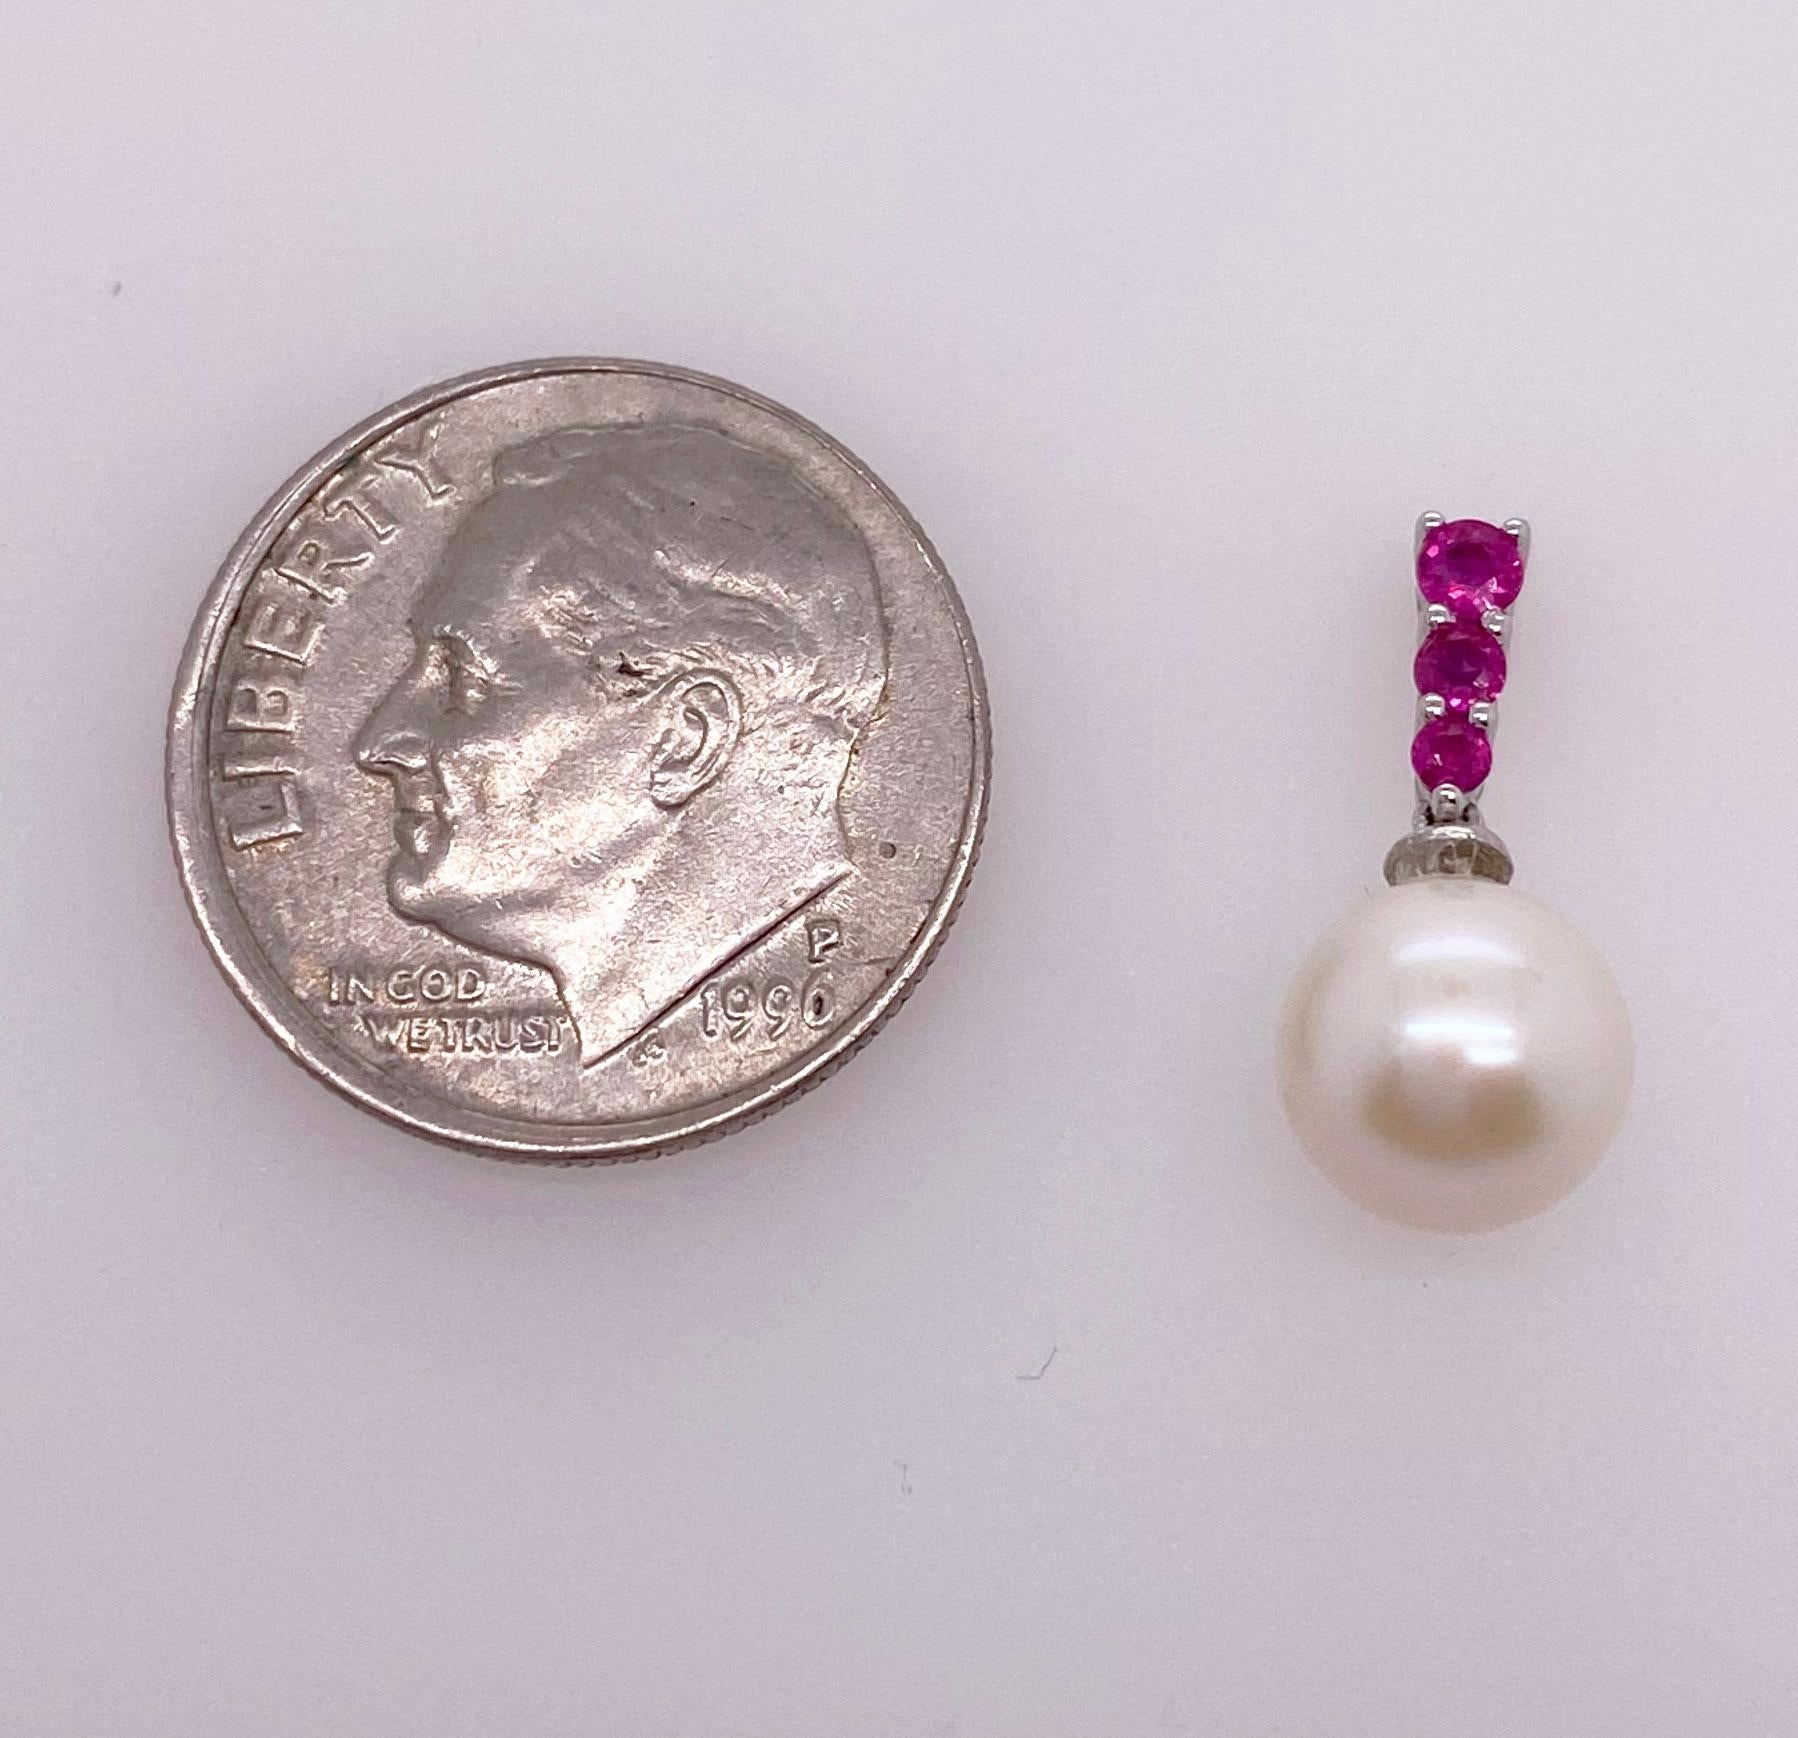 Rubies and Pearls go together so well!  The white of the saltwater Akoya pearls looks great with the intensity of the red in the rubies!  These earrings are great for everyday wear or for an evening out on the town. Classic but unique and always in